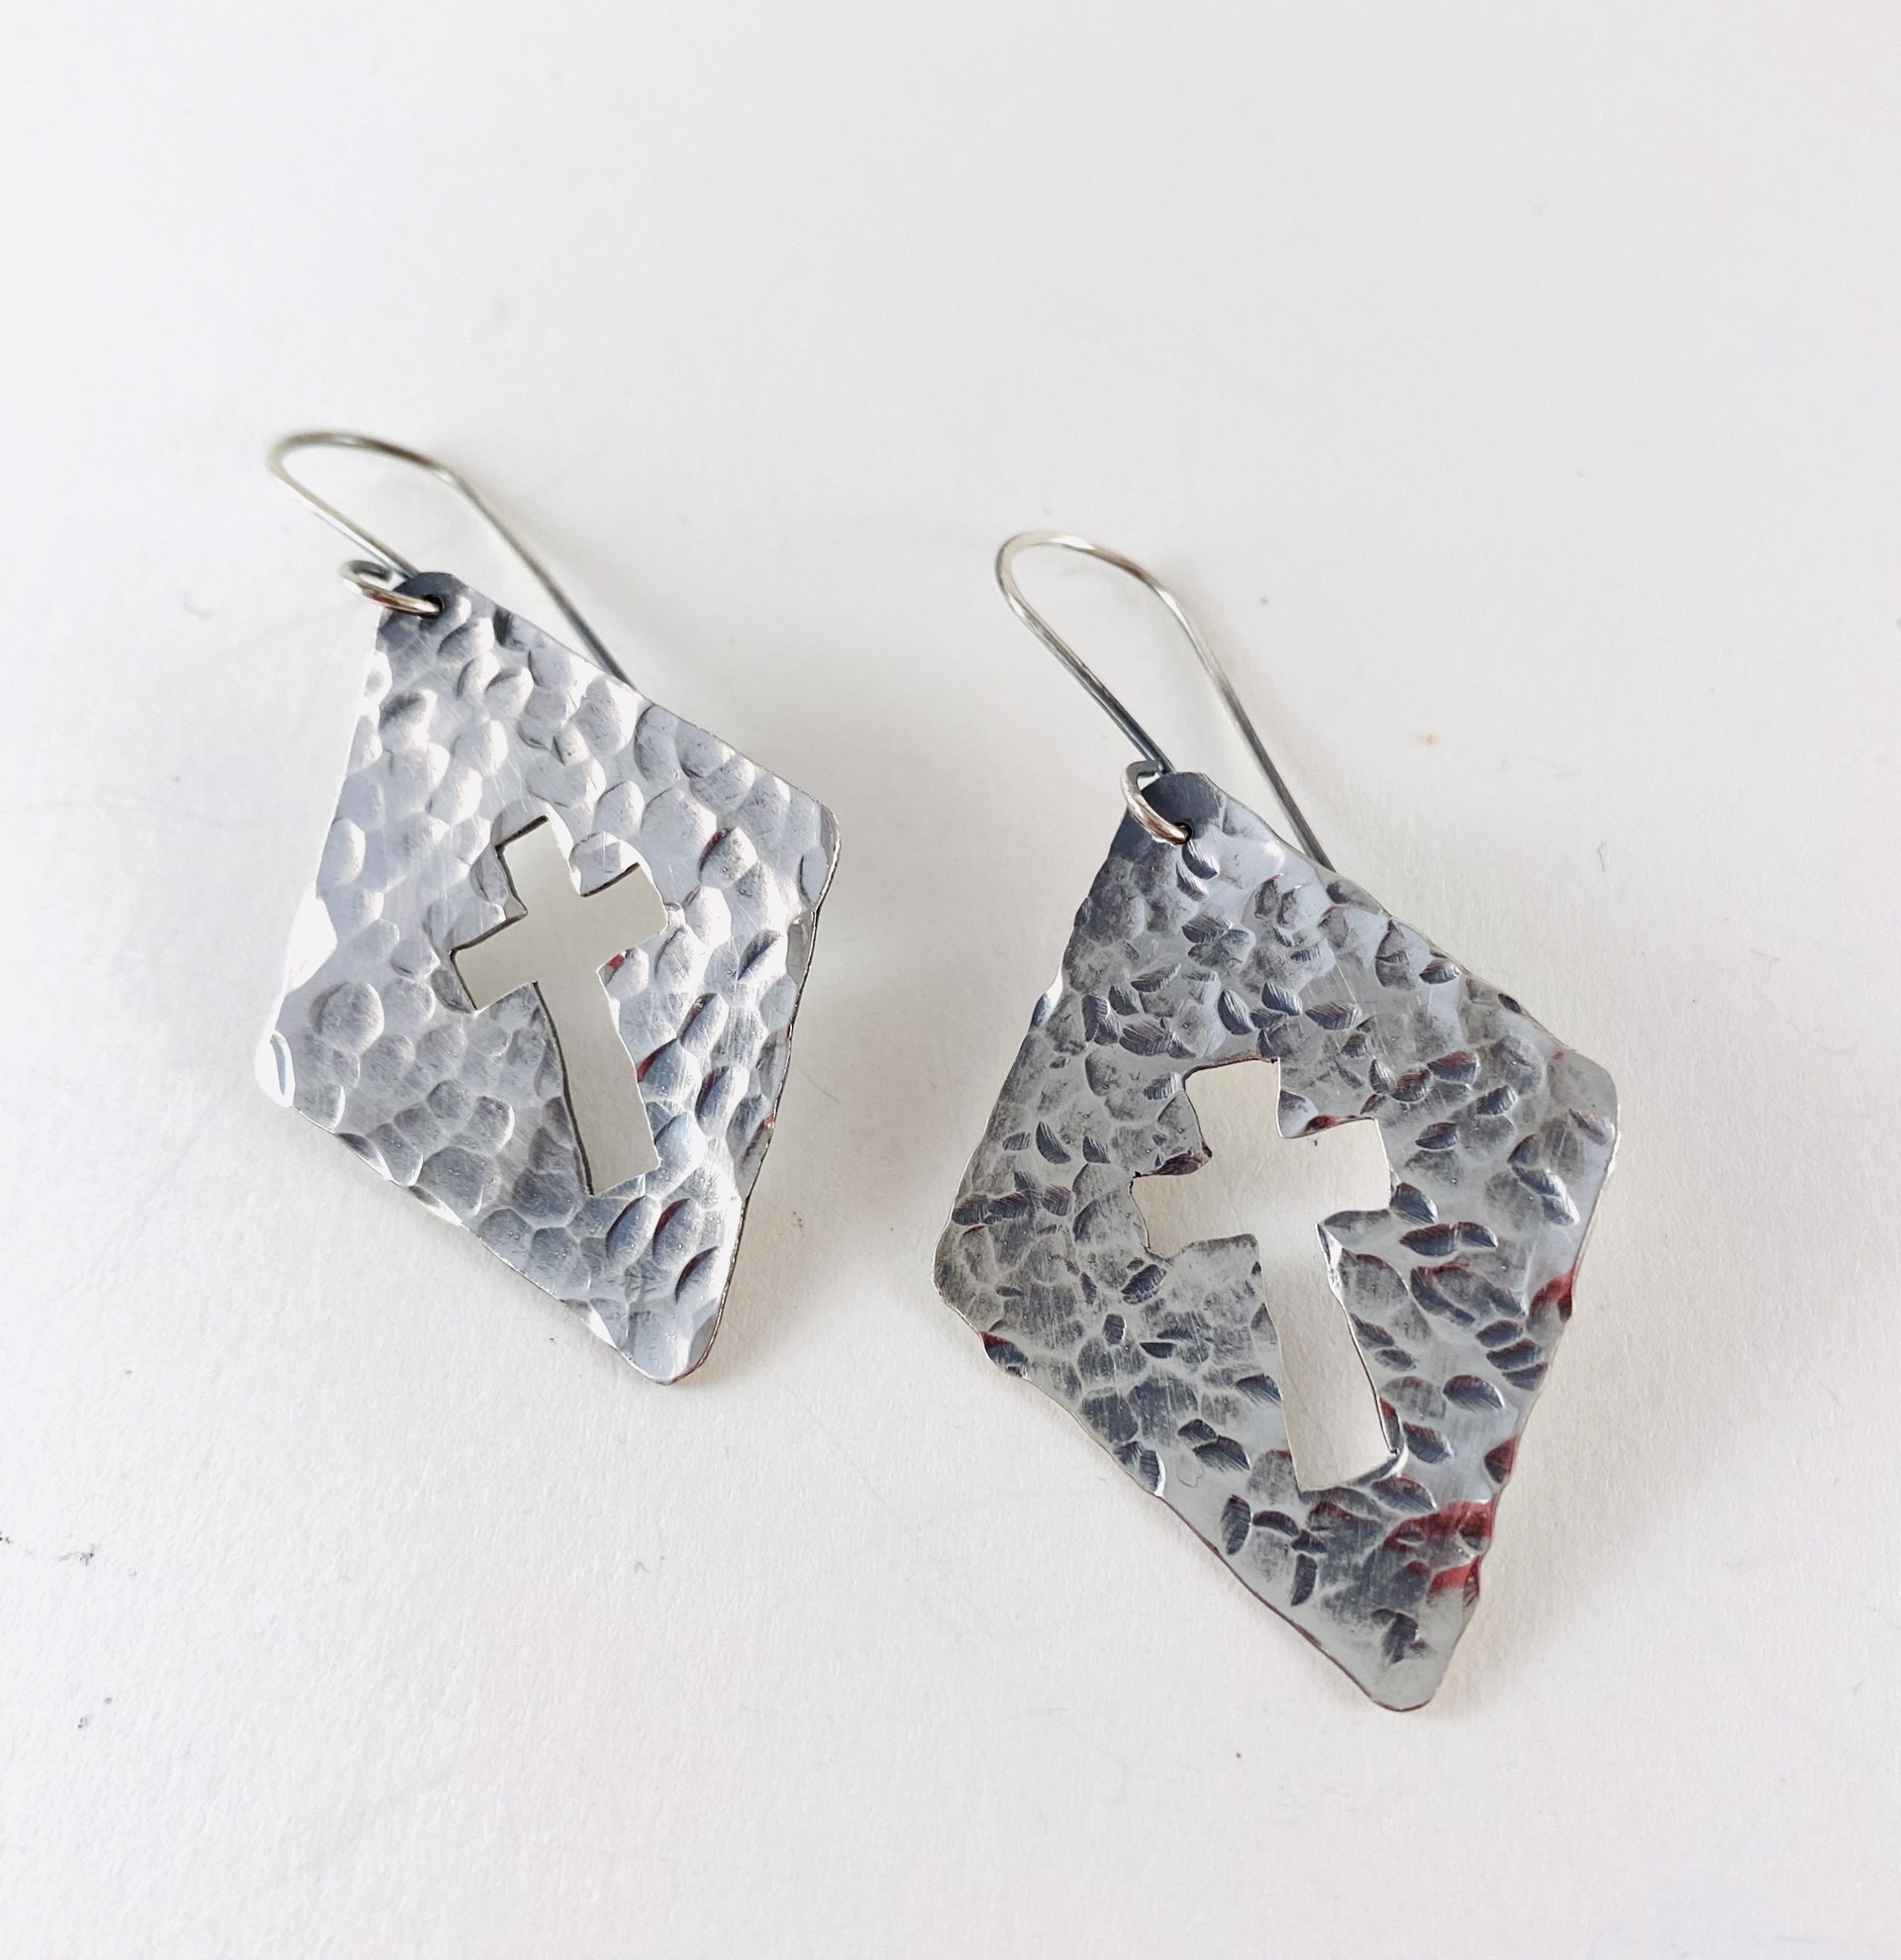 Hand Hammered and Cross Cut Out Silver Earrings AB20-12 by Anne Bivens